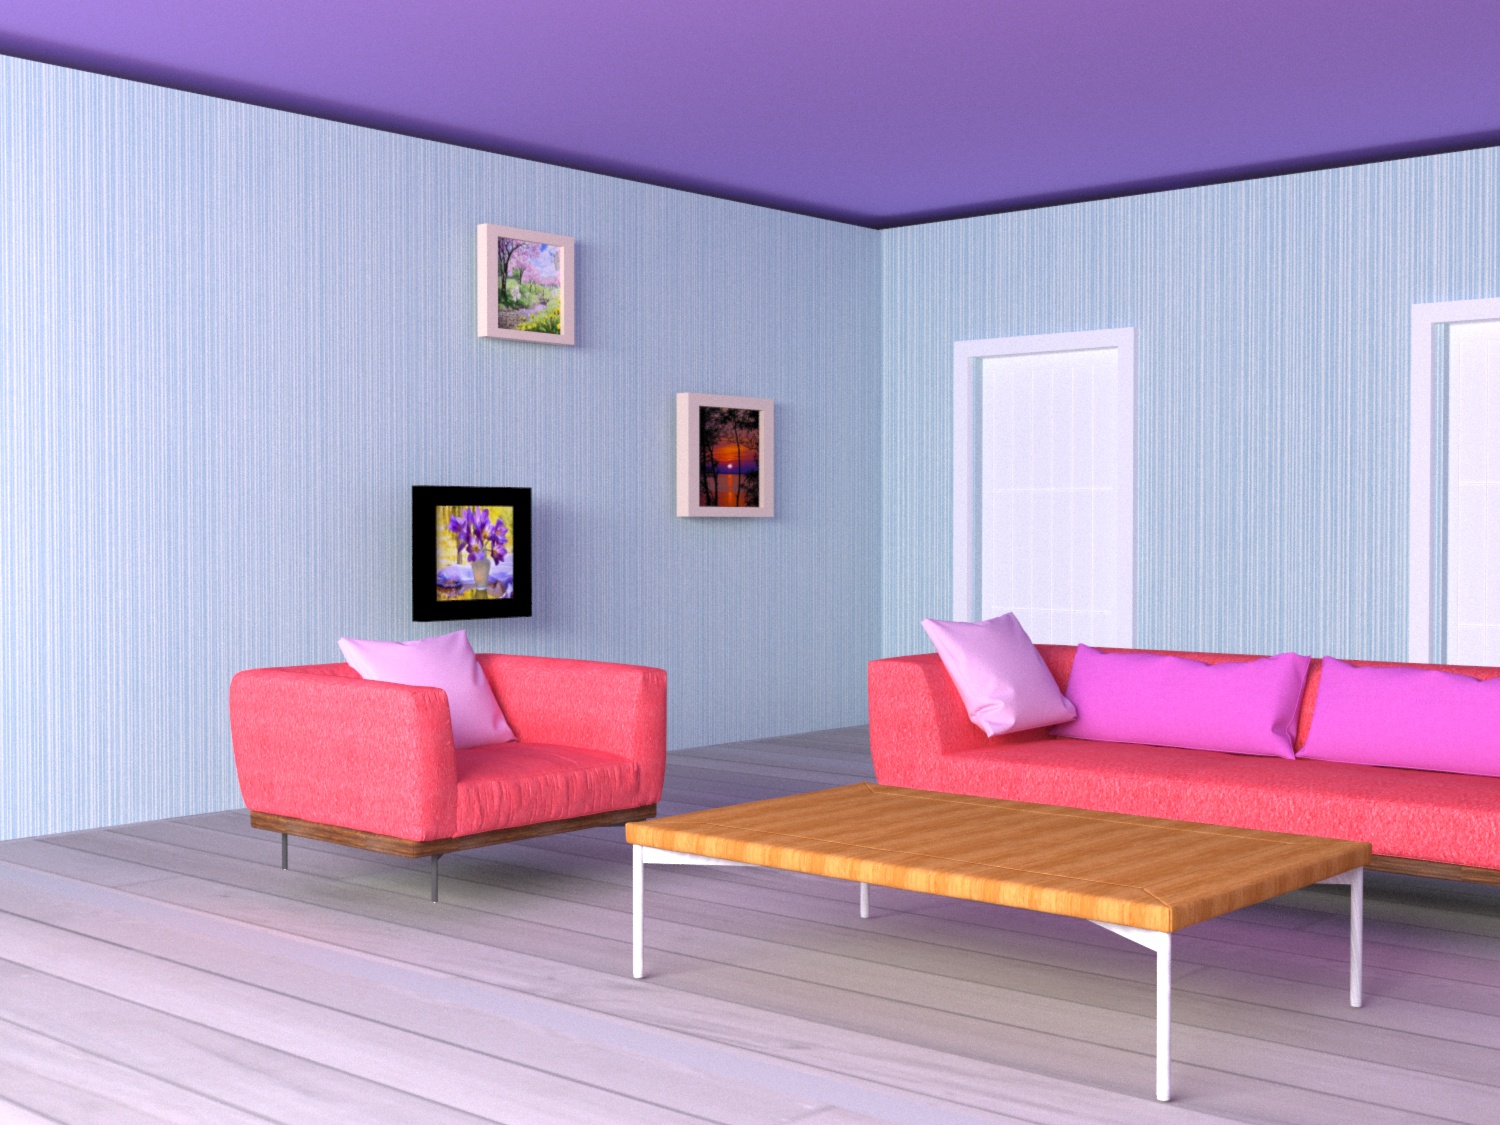 living room in 3d max vray 3.0 image